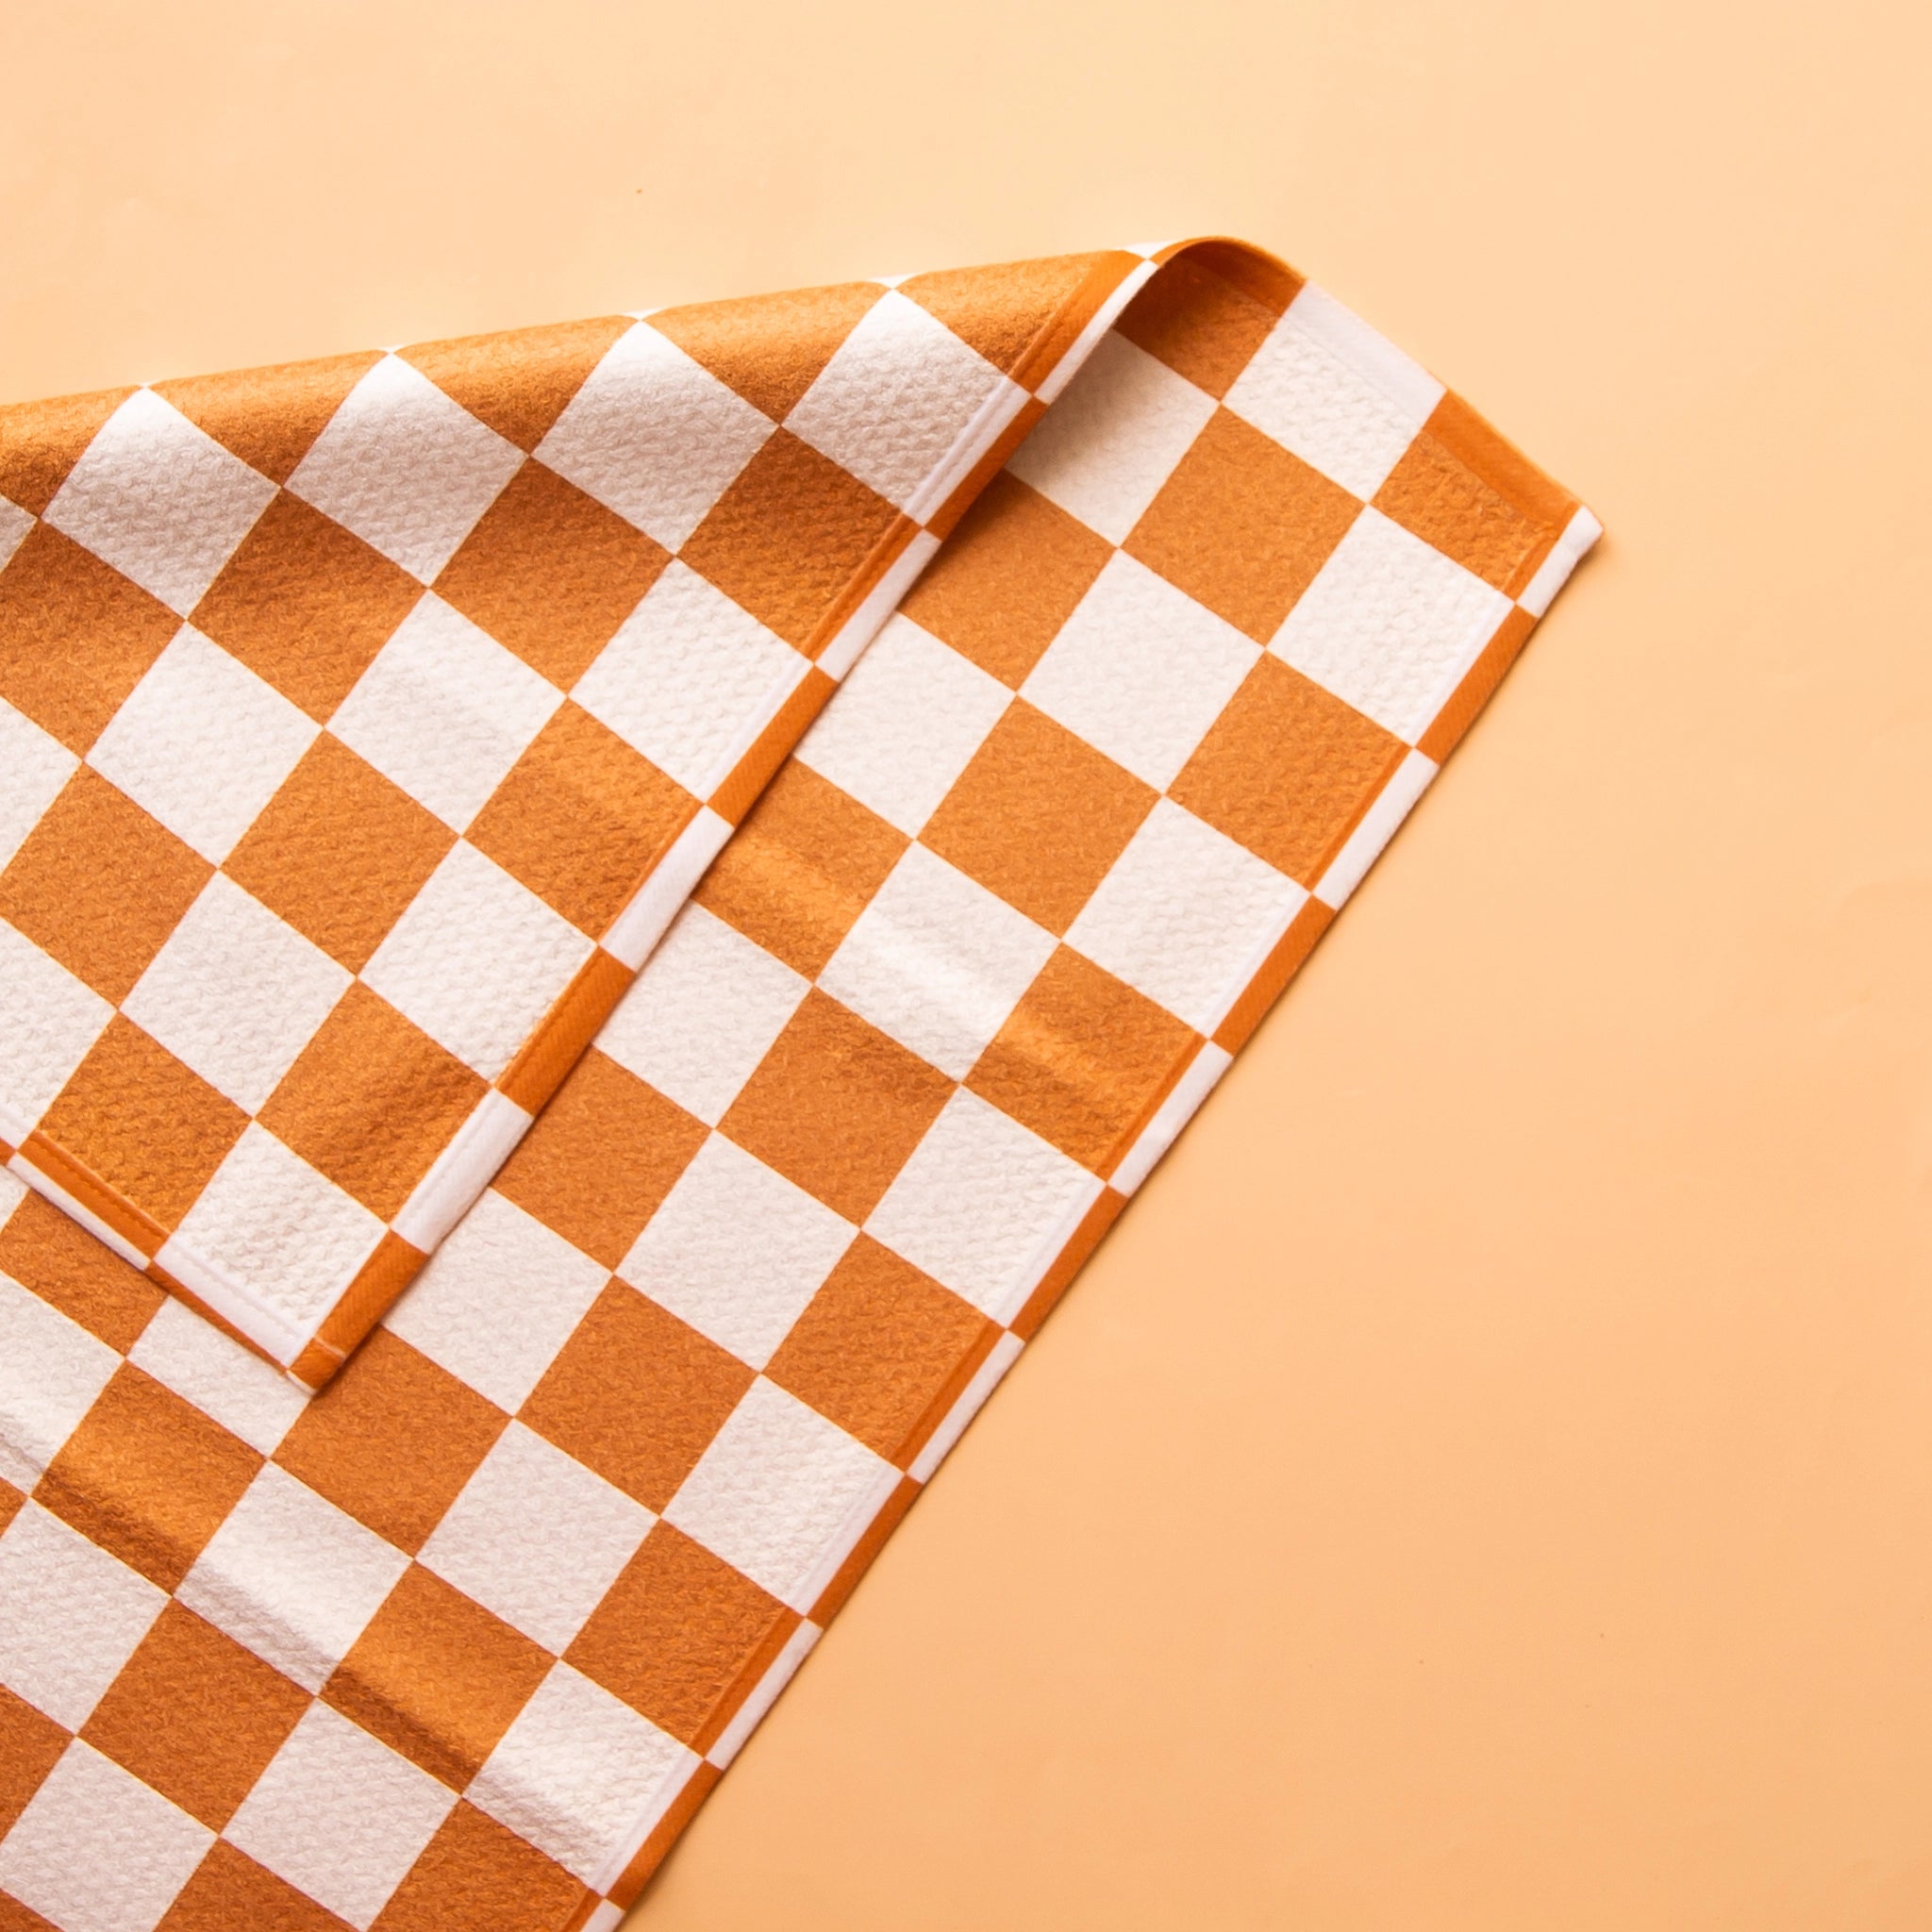 On an orange backdrop is an orange and ivory checkered kitchen towel.